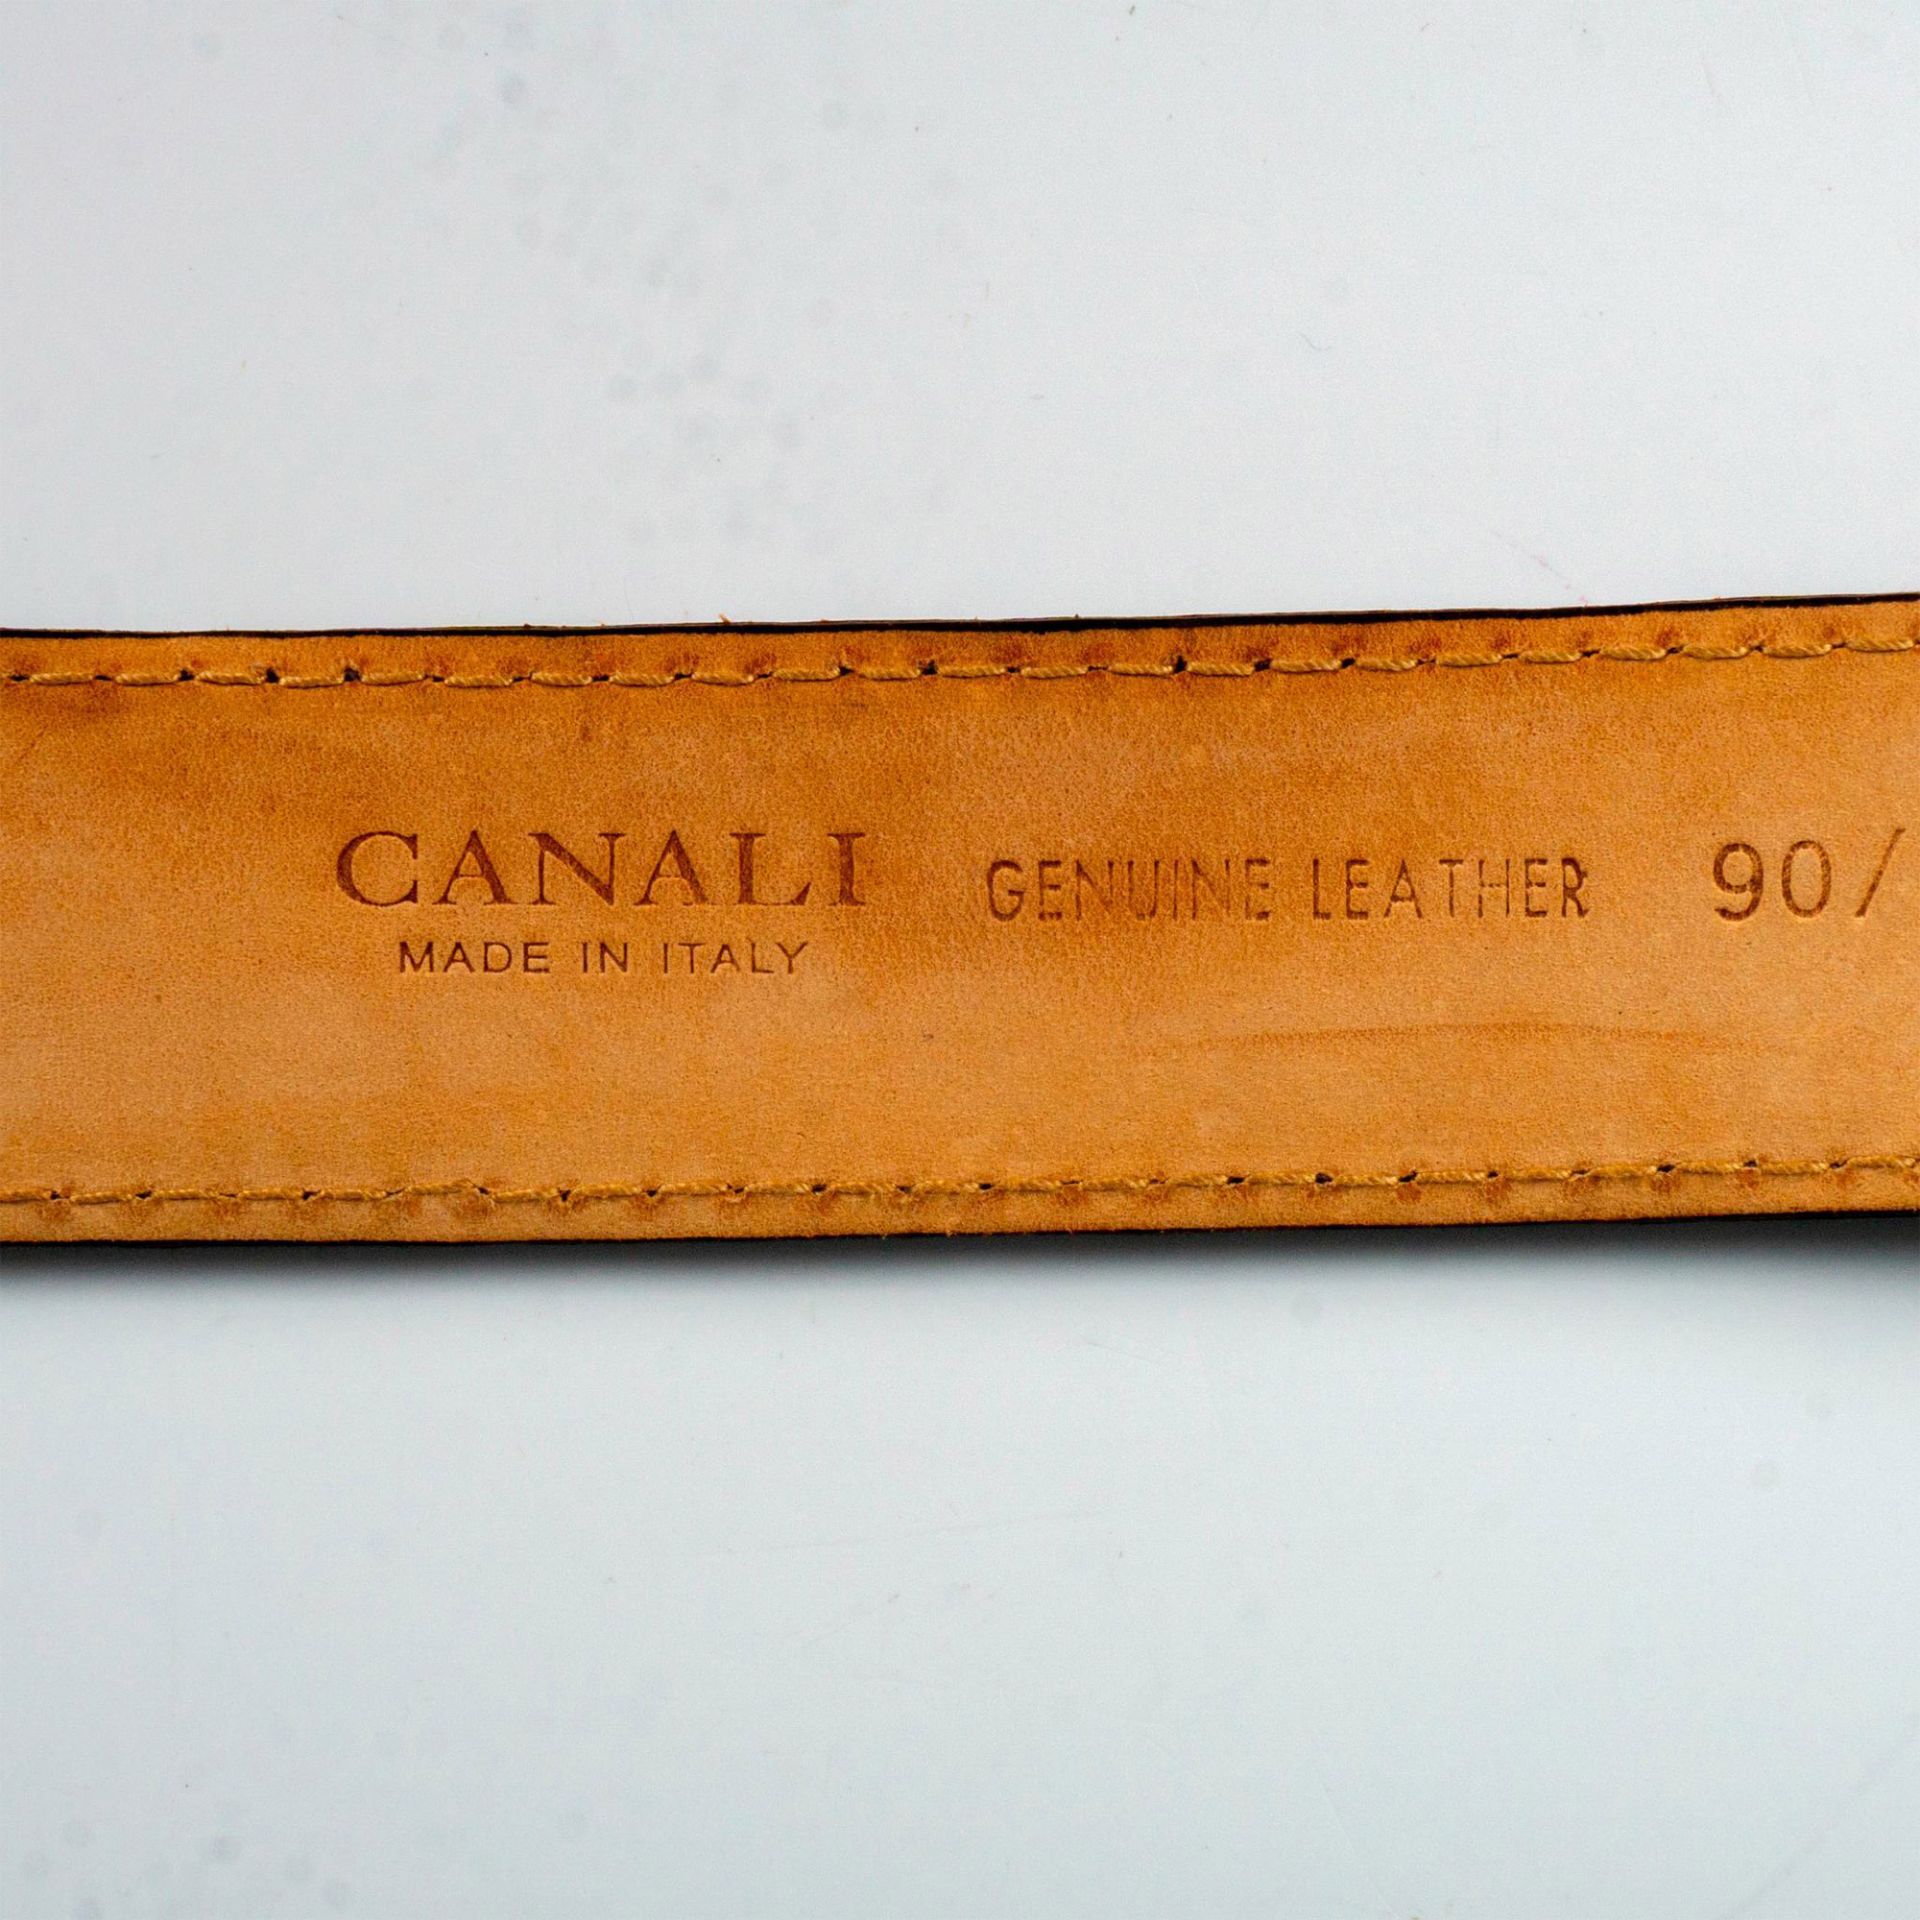 2pc Belts Ferragamo and Canali from Italy - Image 4 of 5